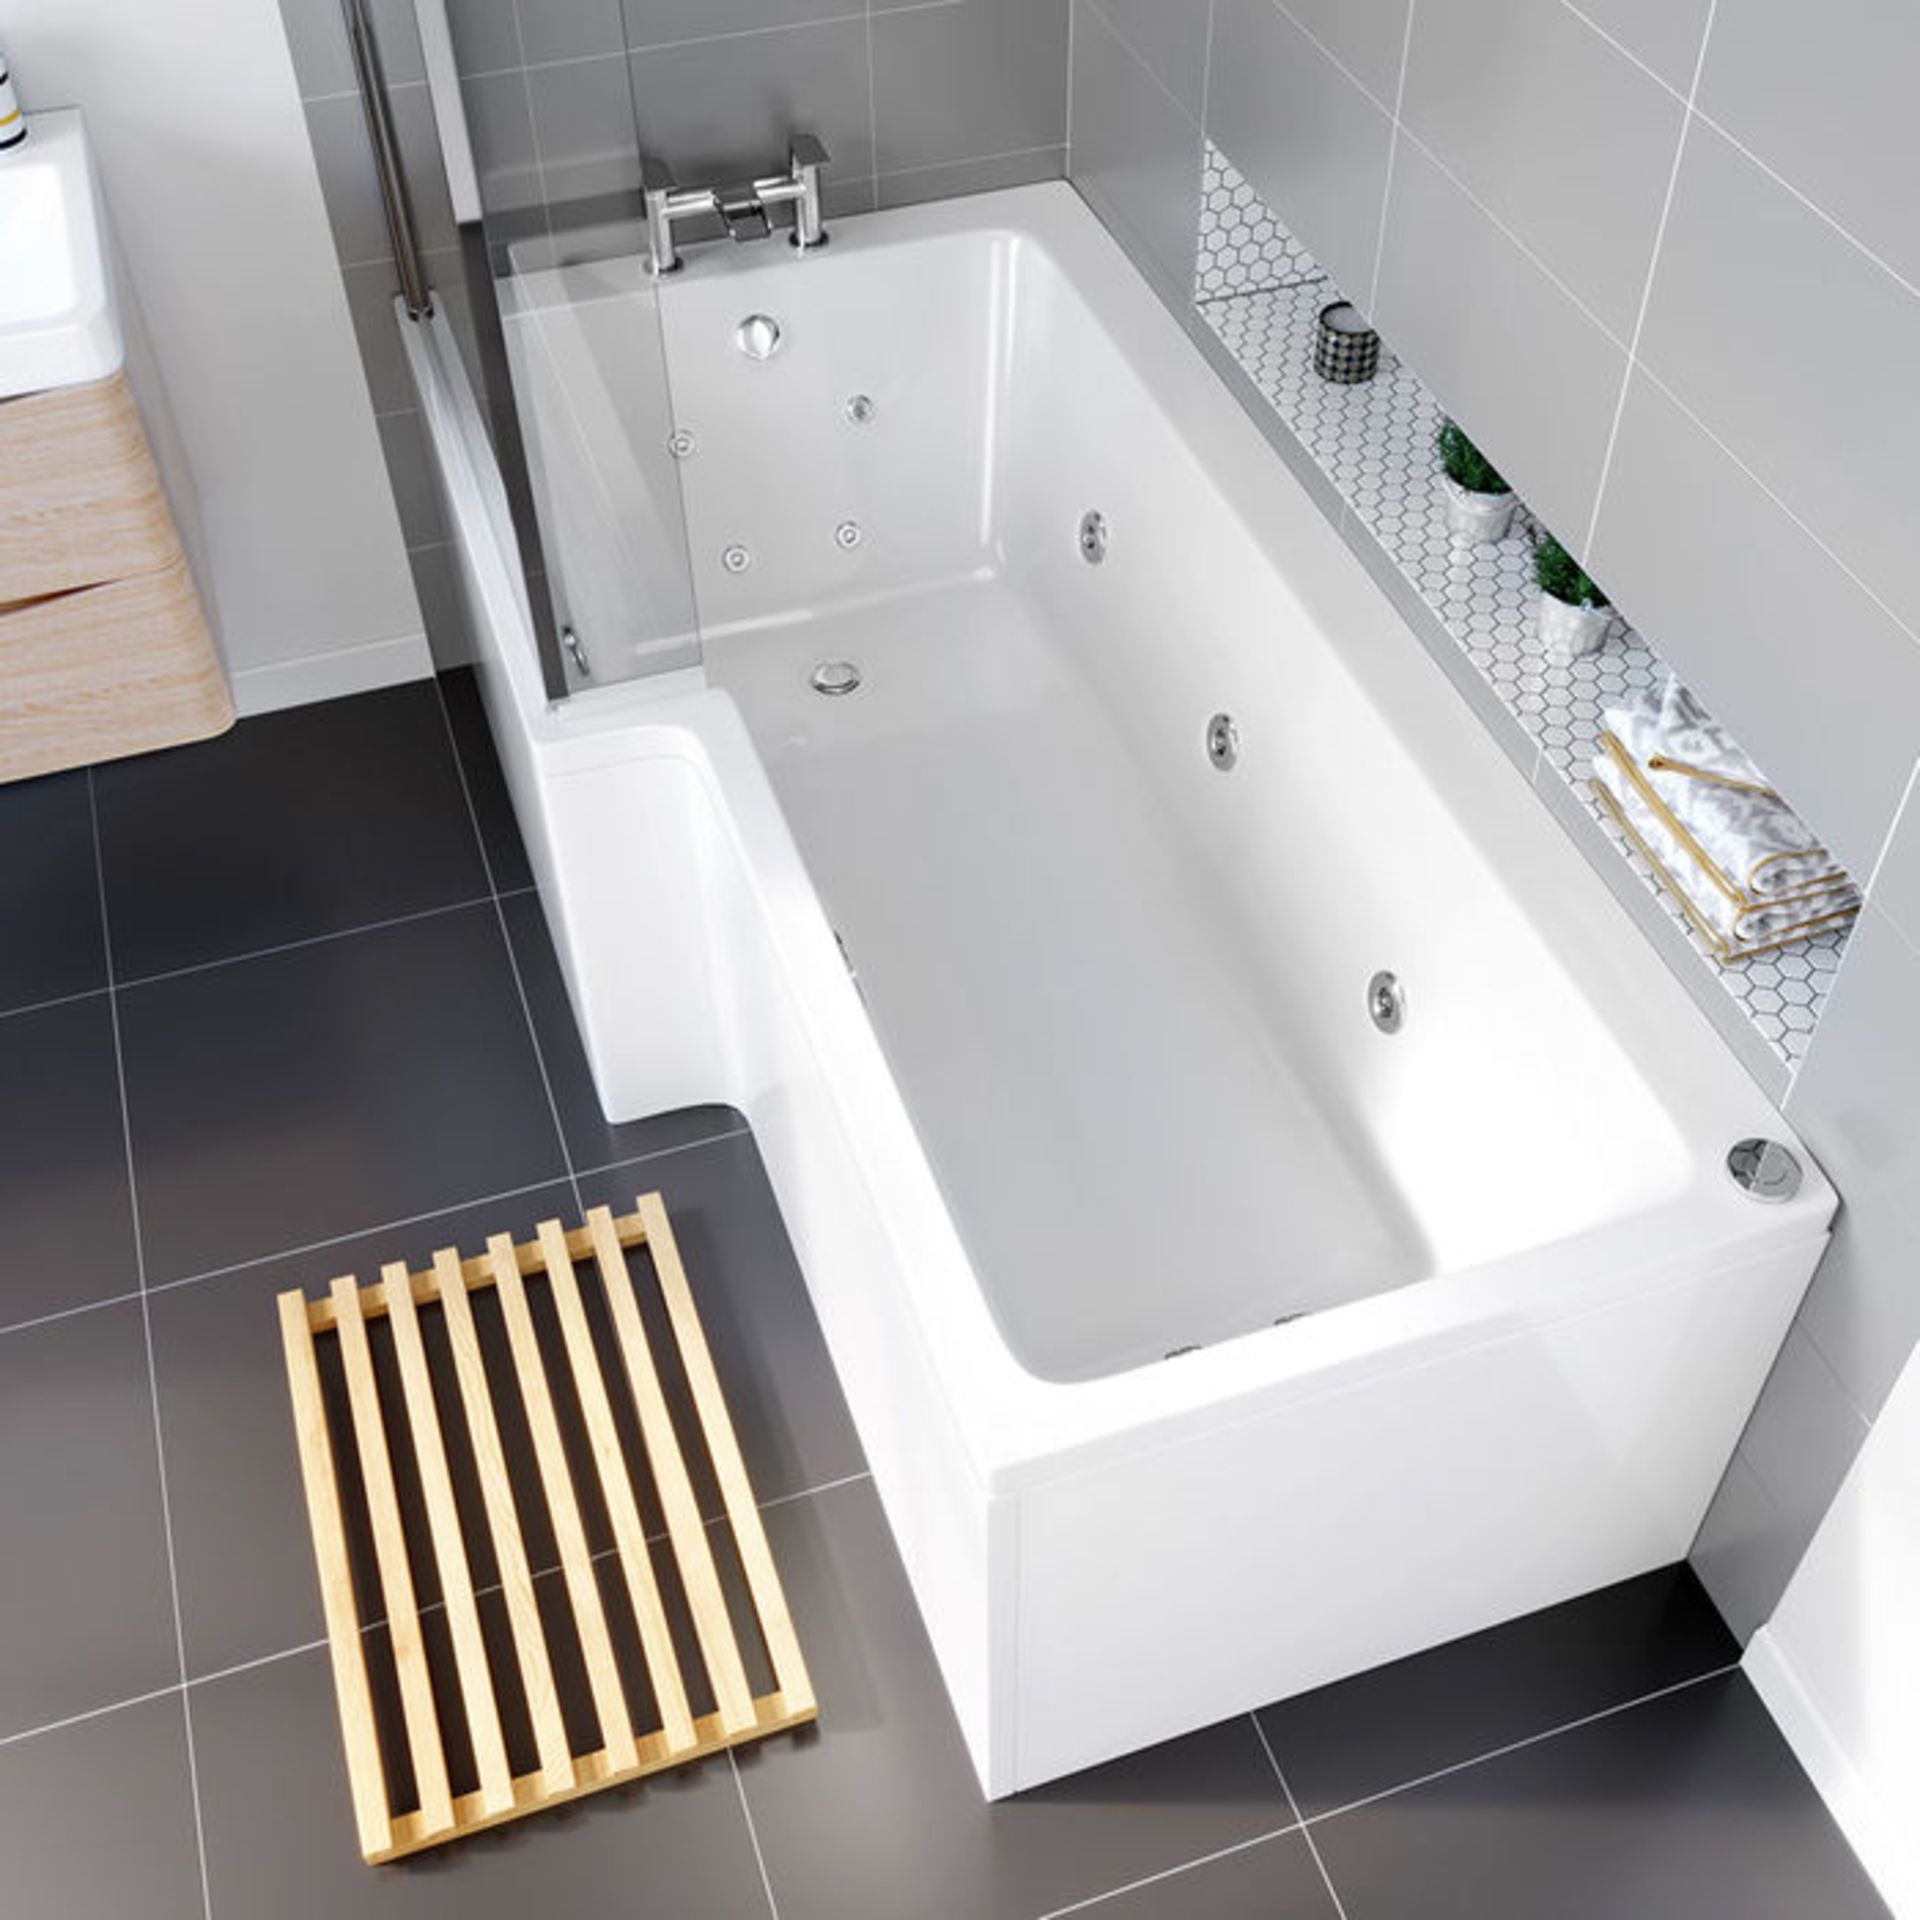 (TA3) 1700x700x510mm Whirlpool Left Hand L Shaped Bath - 14 Jets. Indulge in luxury for a truly - Image 2 of 4